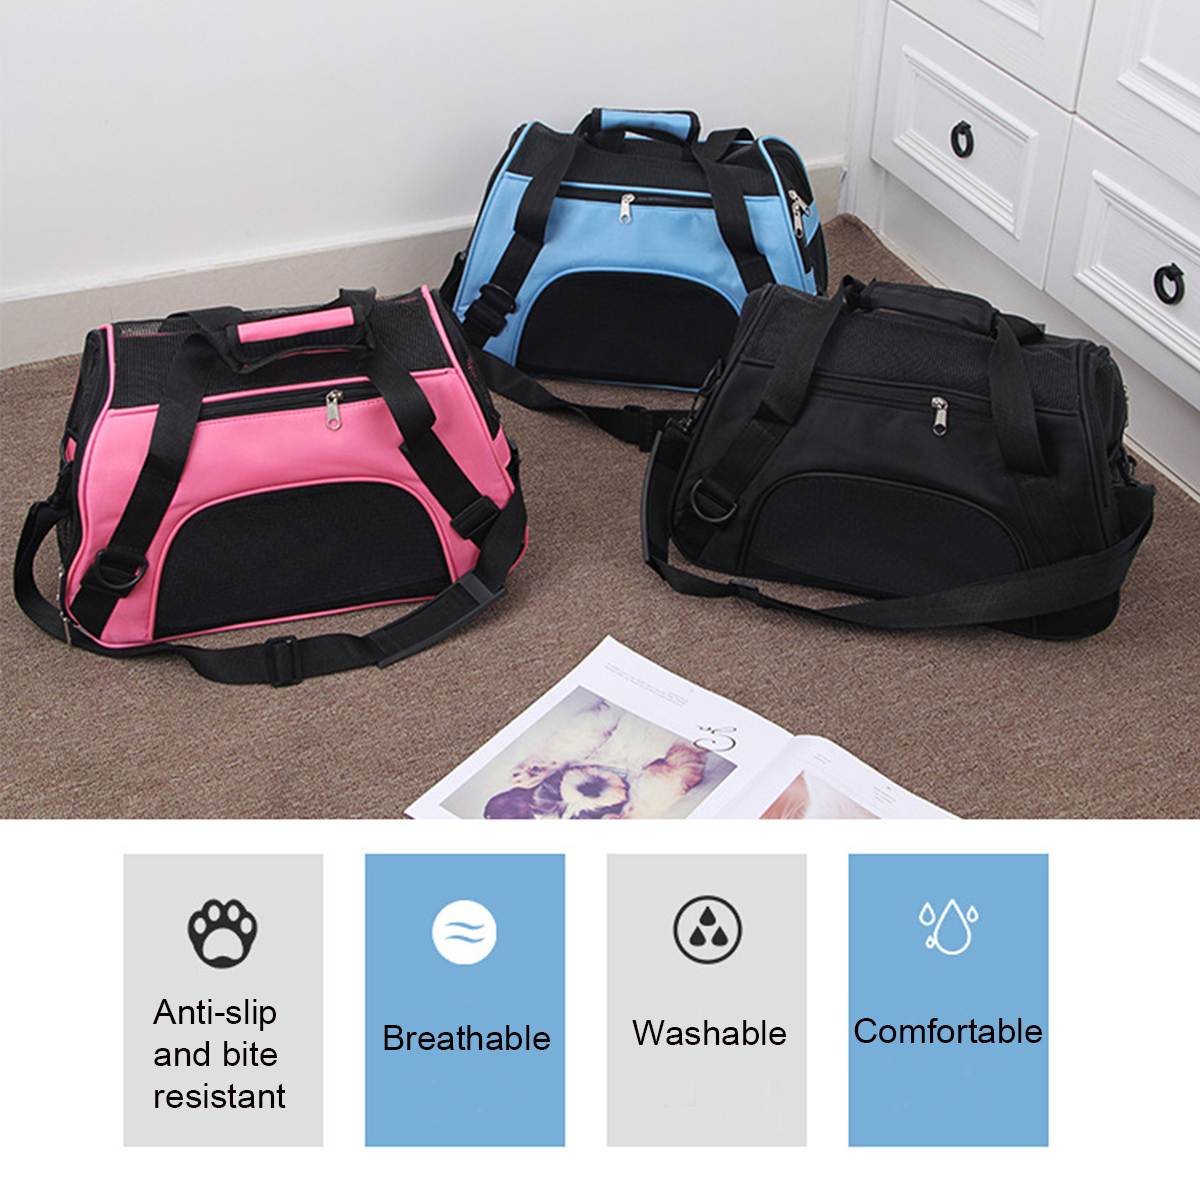 Portable-Dog-Cat-Carrier-Bag-Soft-sided-Pet-Puppy-Travel-Bags-Breathable-Mesh-Small-Pet-Chihuahua-Ca-1789561-2